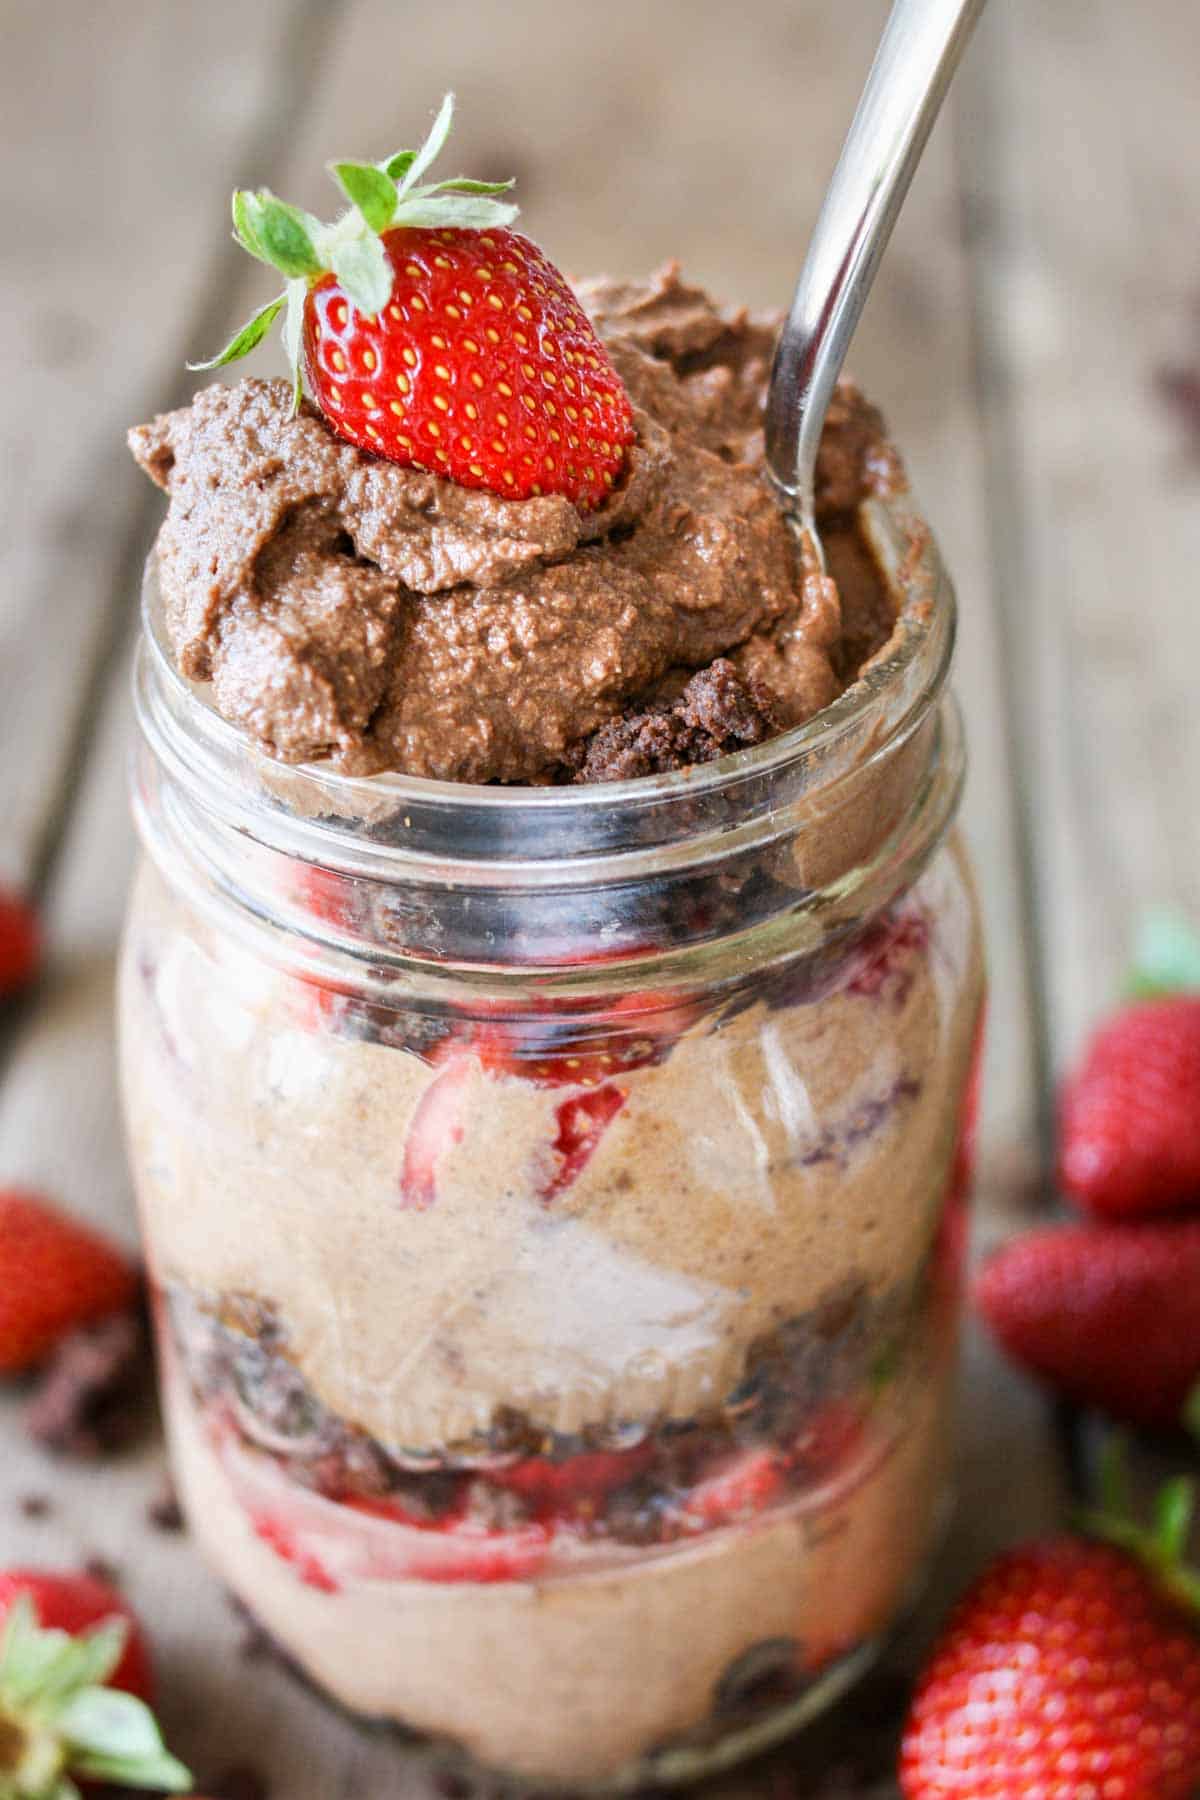 A spoon in a glass jar filled with chocolate mousse, strawberries and brownie crumbles.